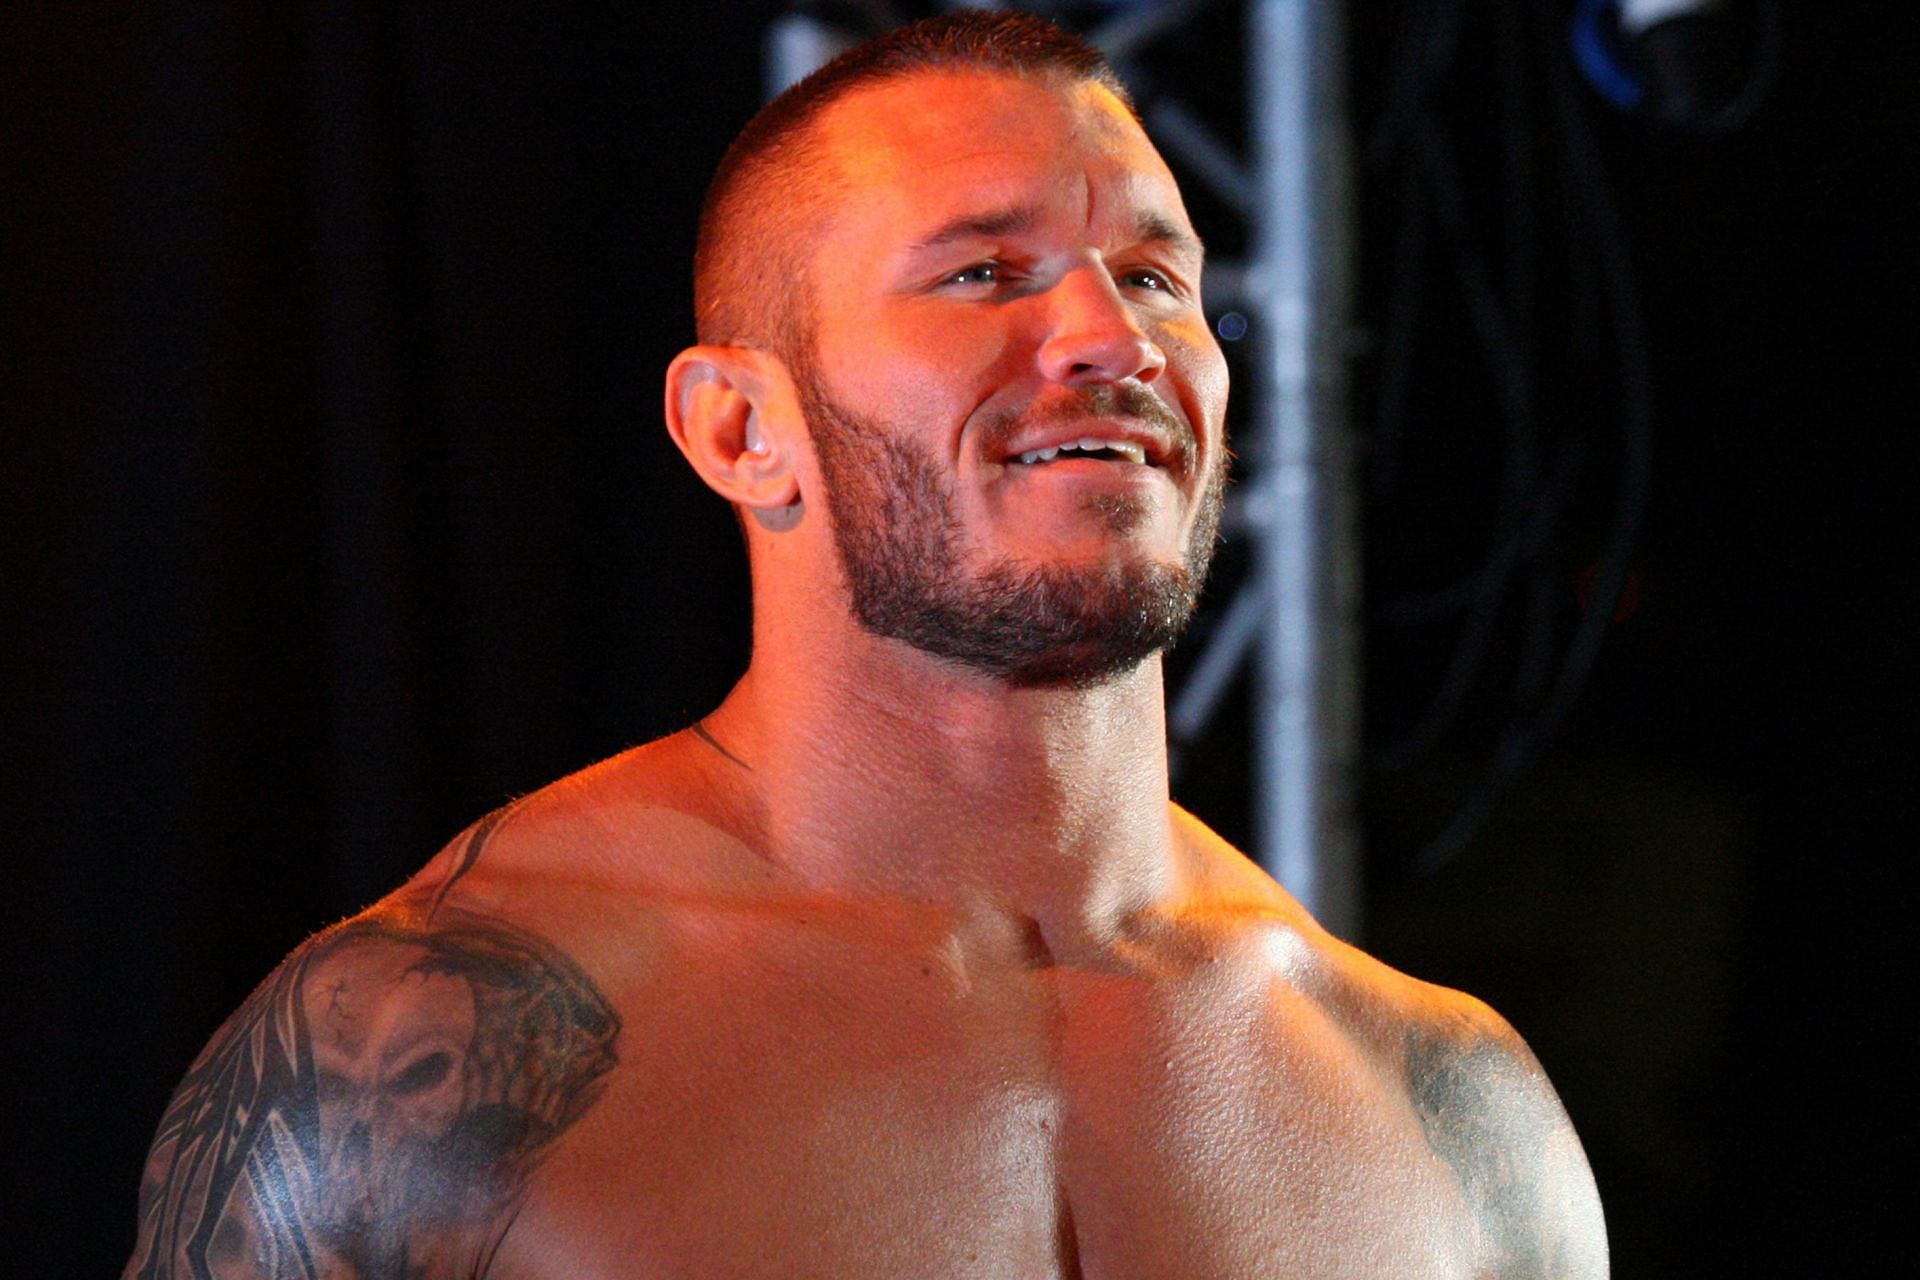 Does The Viper have career aspirations once he hangs up his boots in WWE?